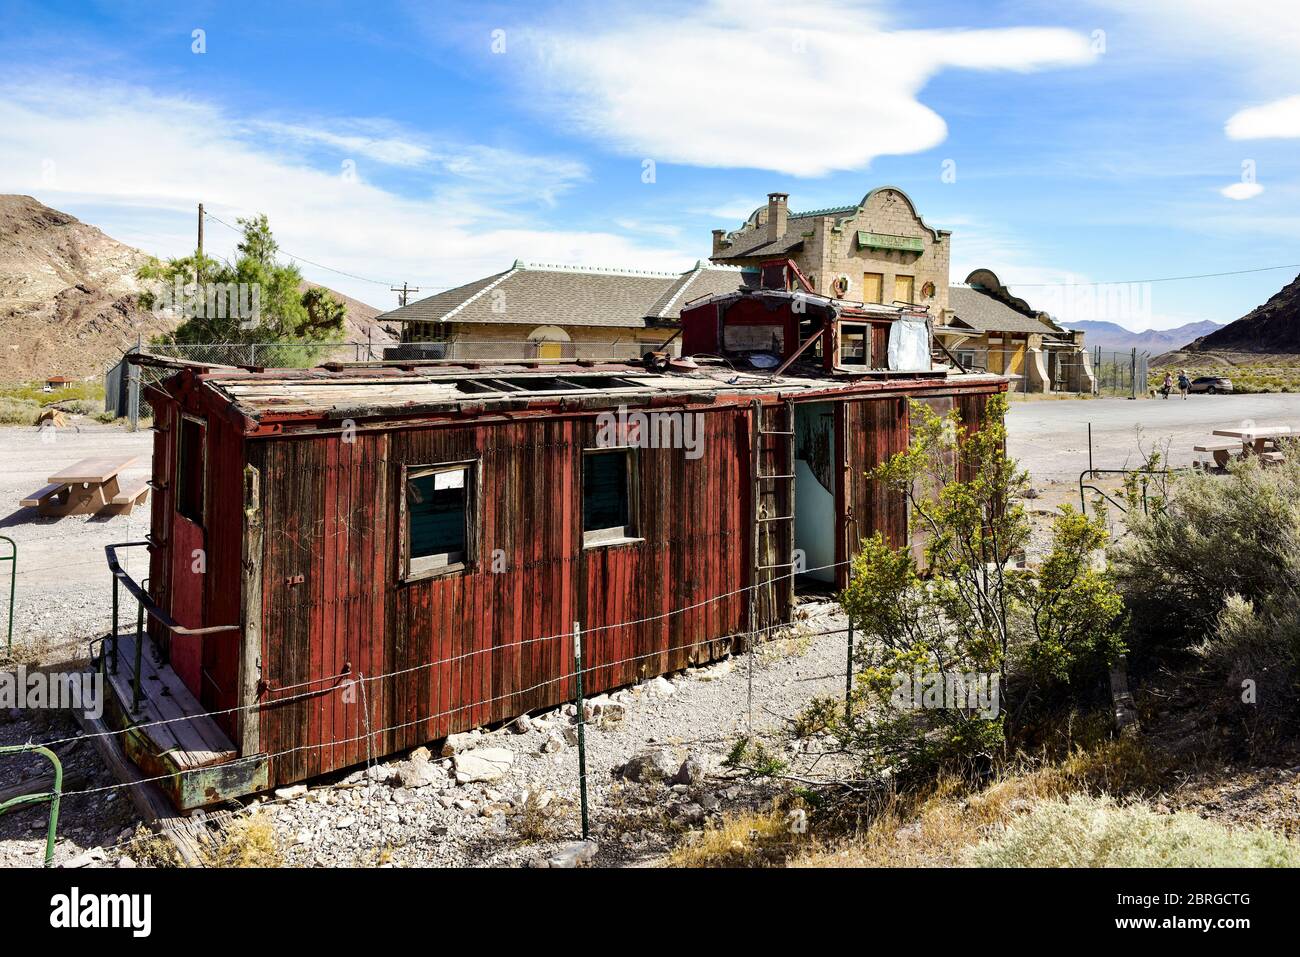 An old Union Pacific railroad car Rhyolite Ghost Town, Beatty, Nevada. Stock Photo